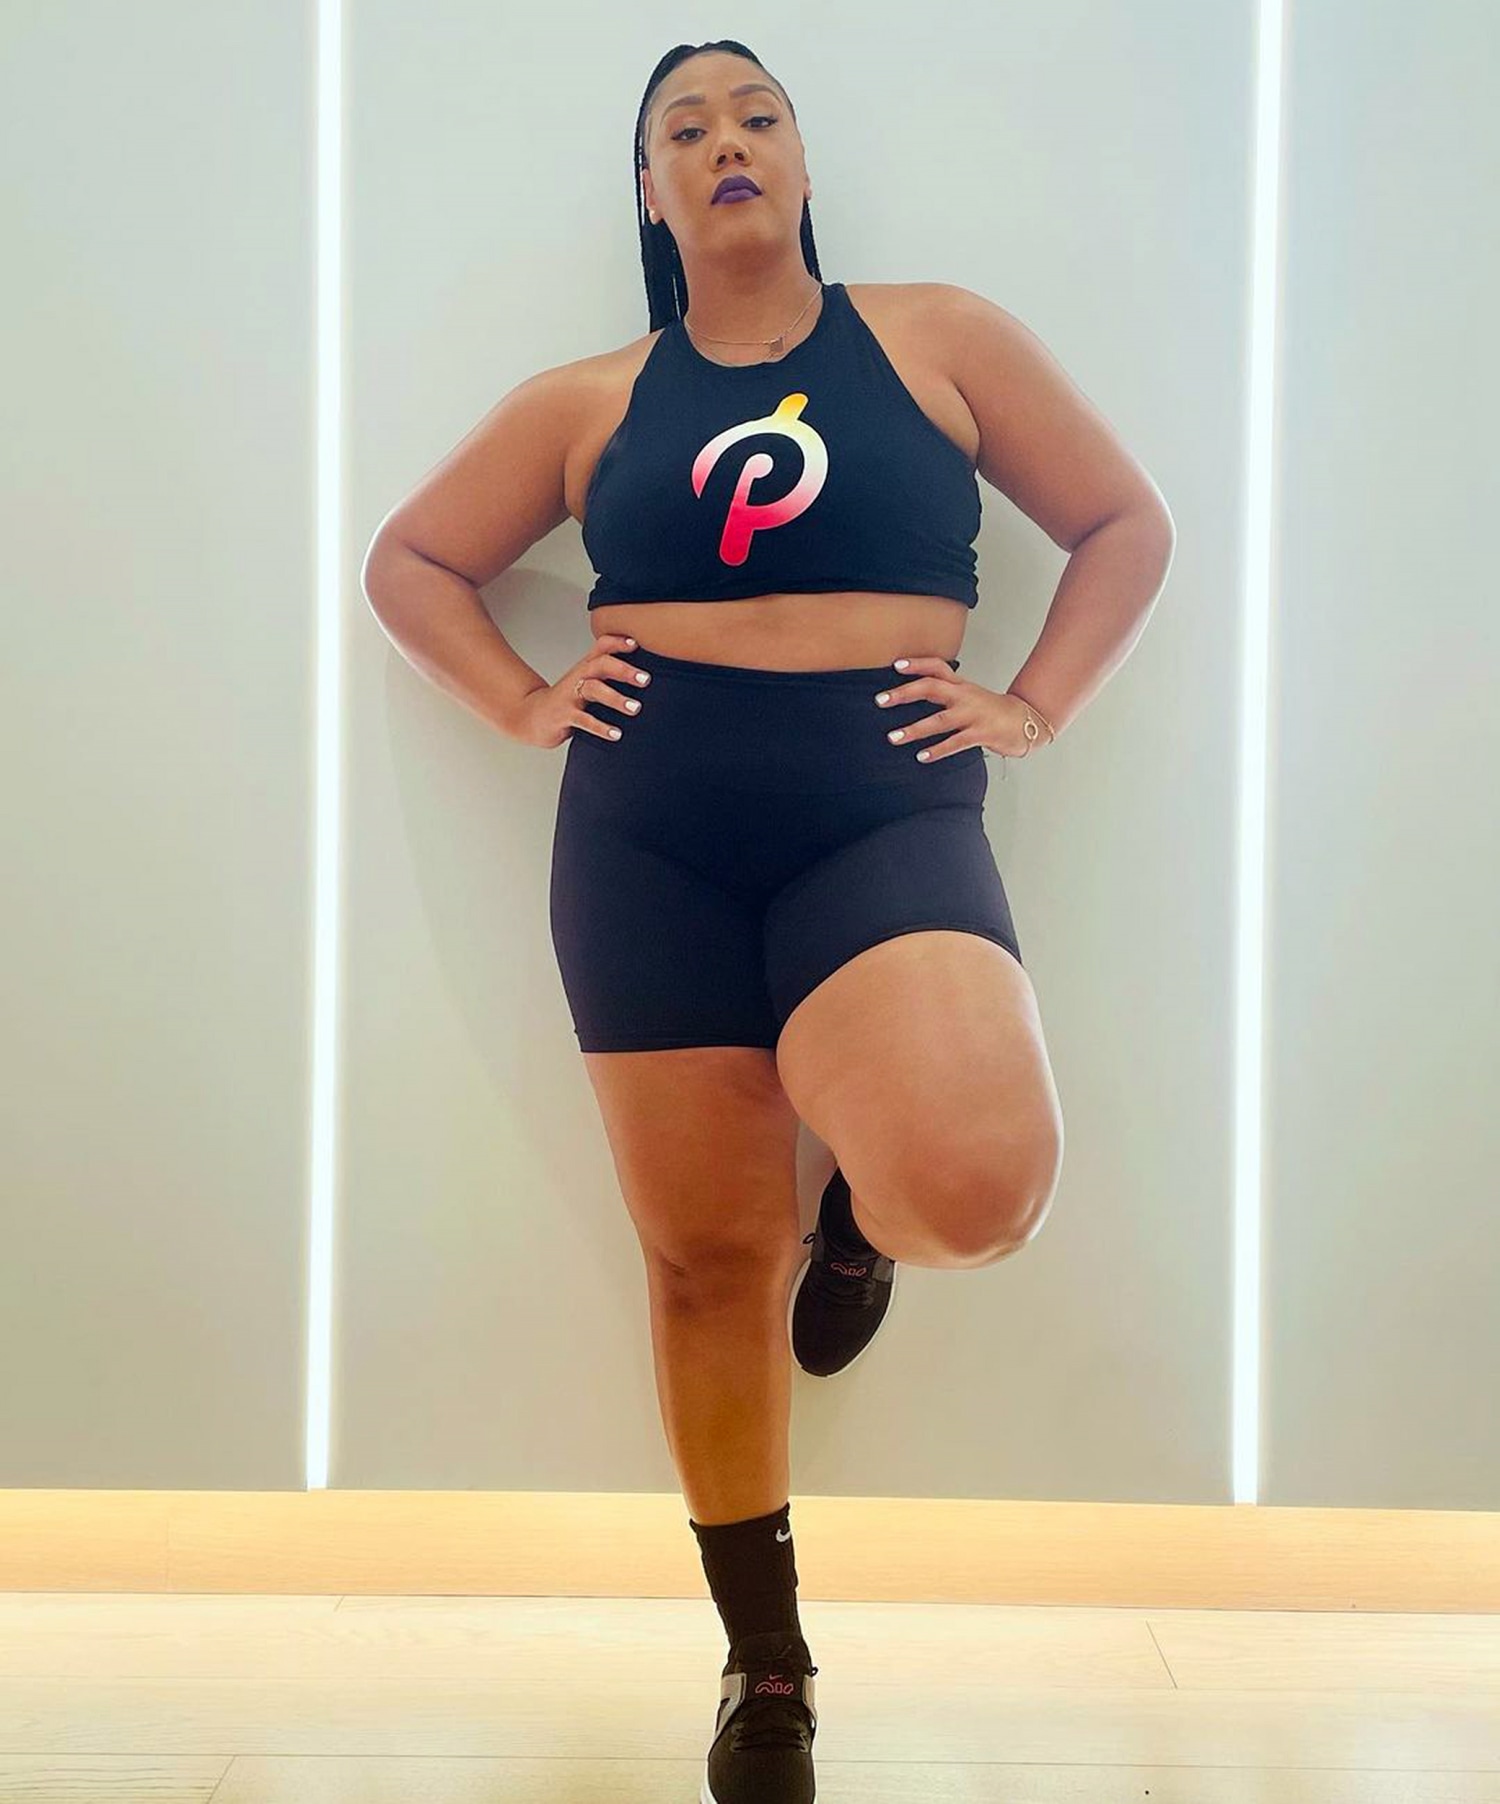 Peloton Instructor Slams 'Disgusting Fat Shaming Comments' on Facebook